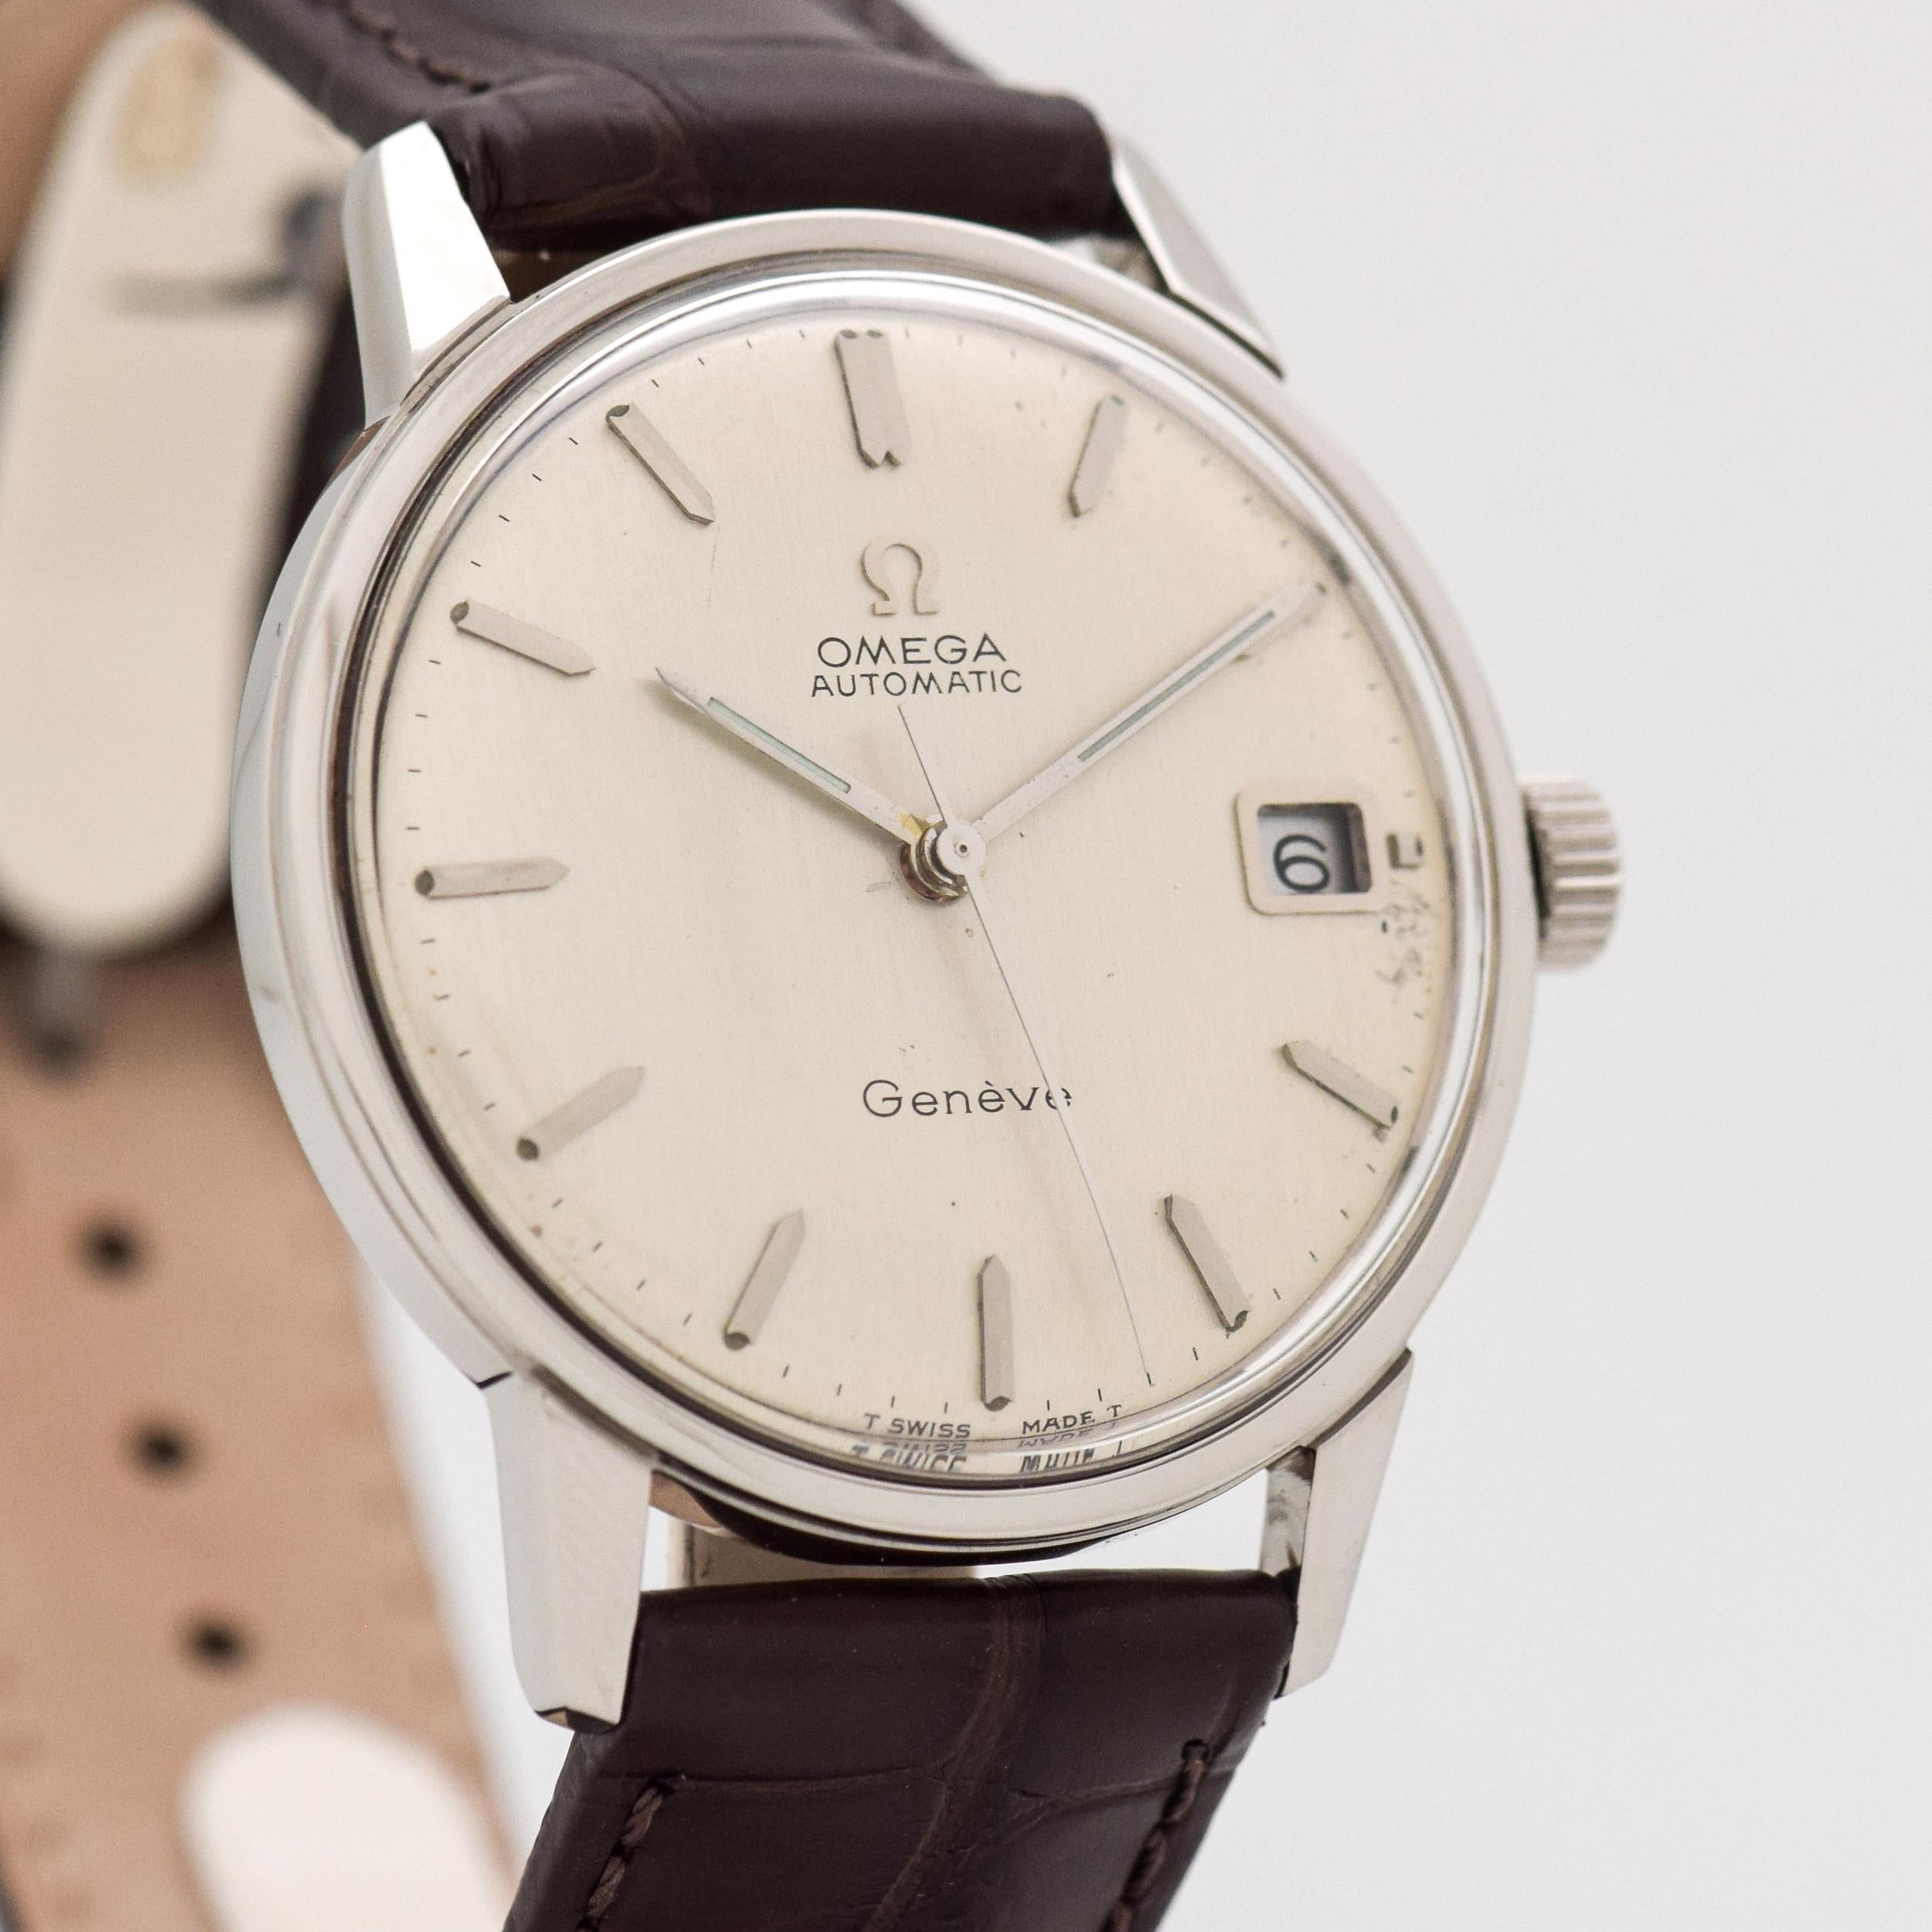 1968 Vintage Omega Geneve Ref. 166.037 Stainless Steel Automatic Date watch with Original Silver Dial with Applied Steel Beveled Pointed Tip Stick/Bar Markers. 34mm x 40mm lug to lug (1.34 in. x 1.57 in.) - Powered by a 17-jewel, automatic caliber